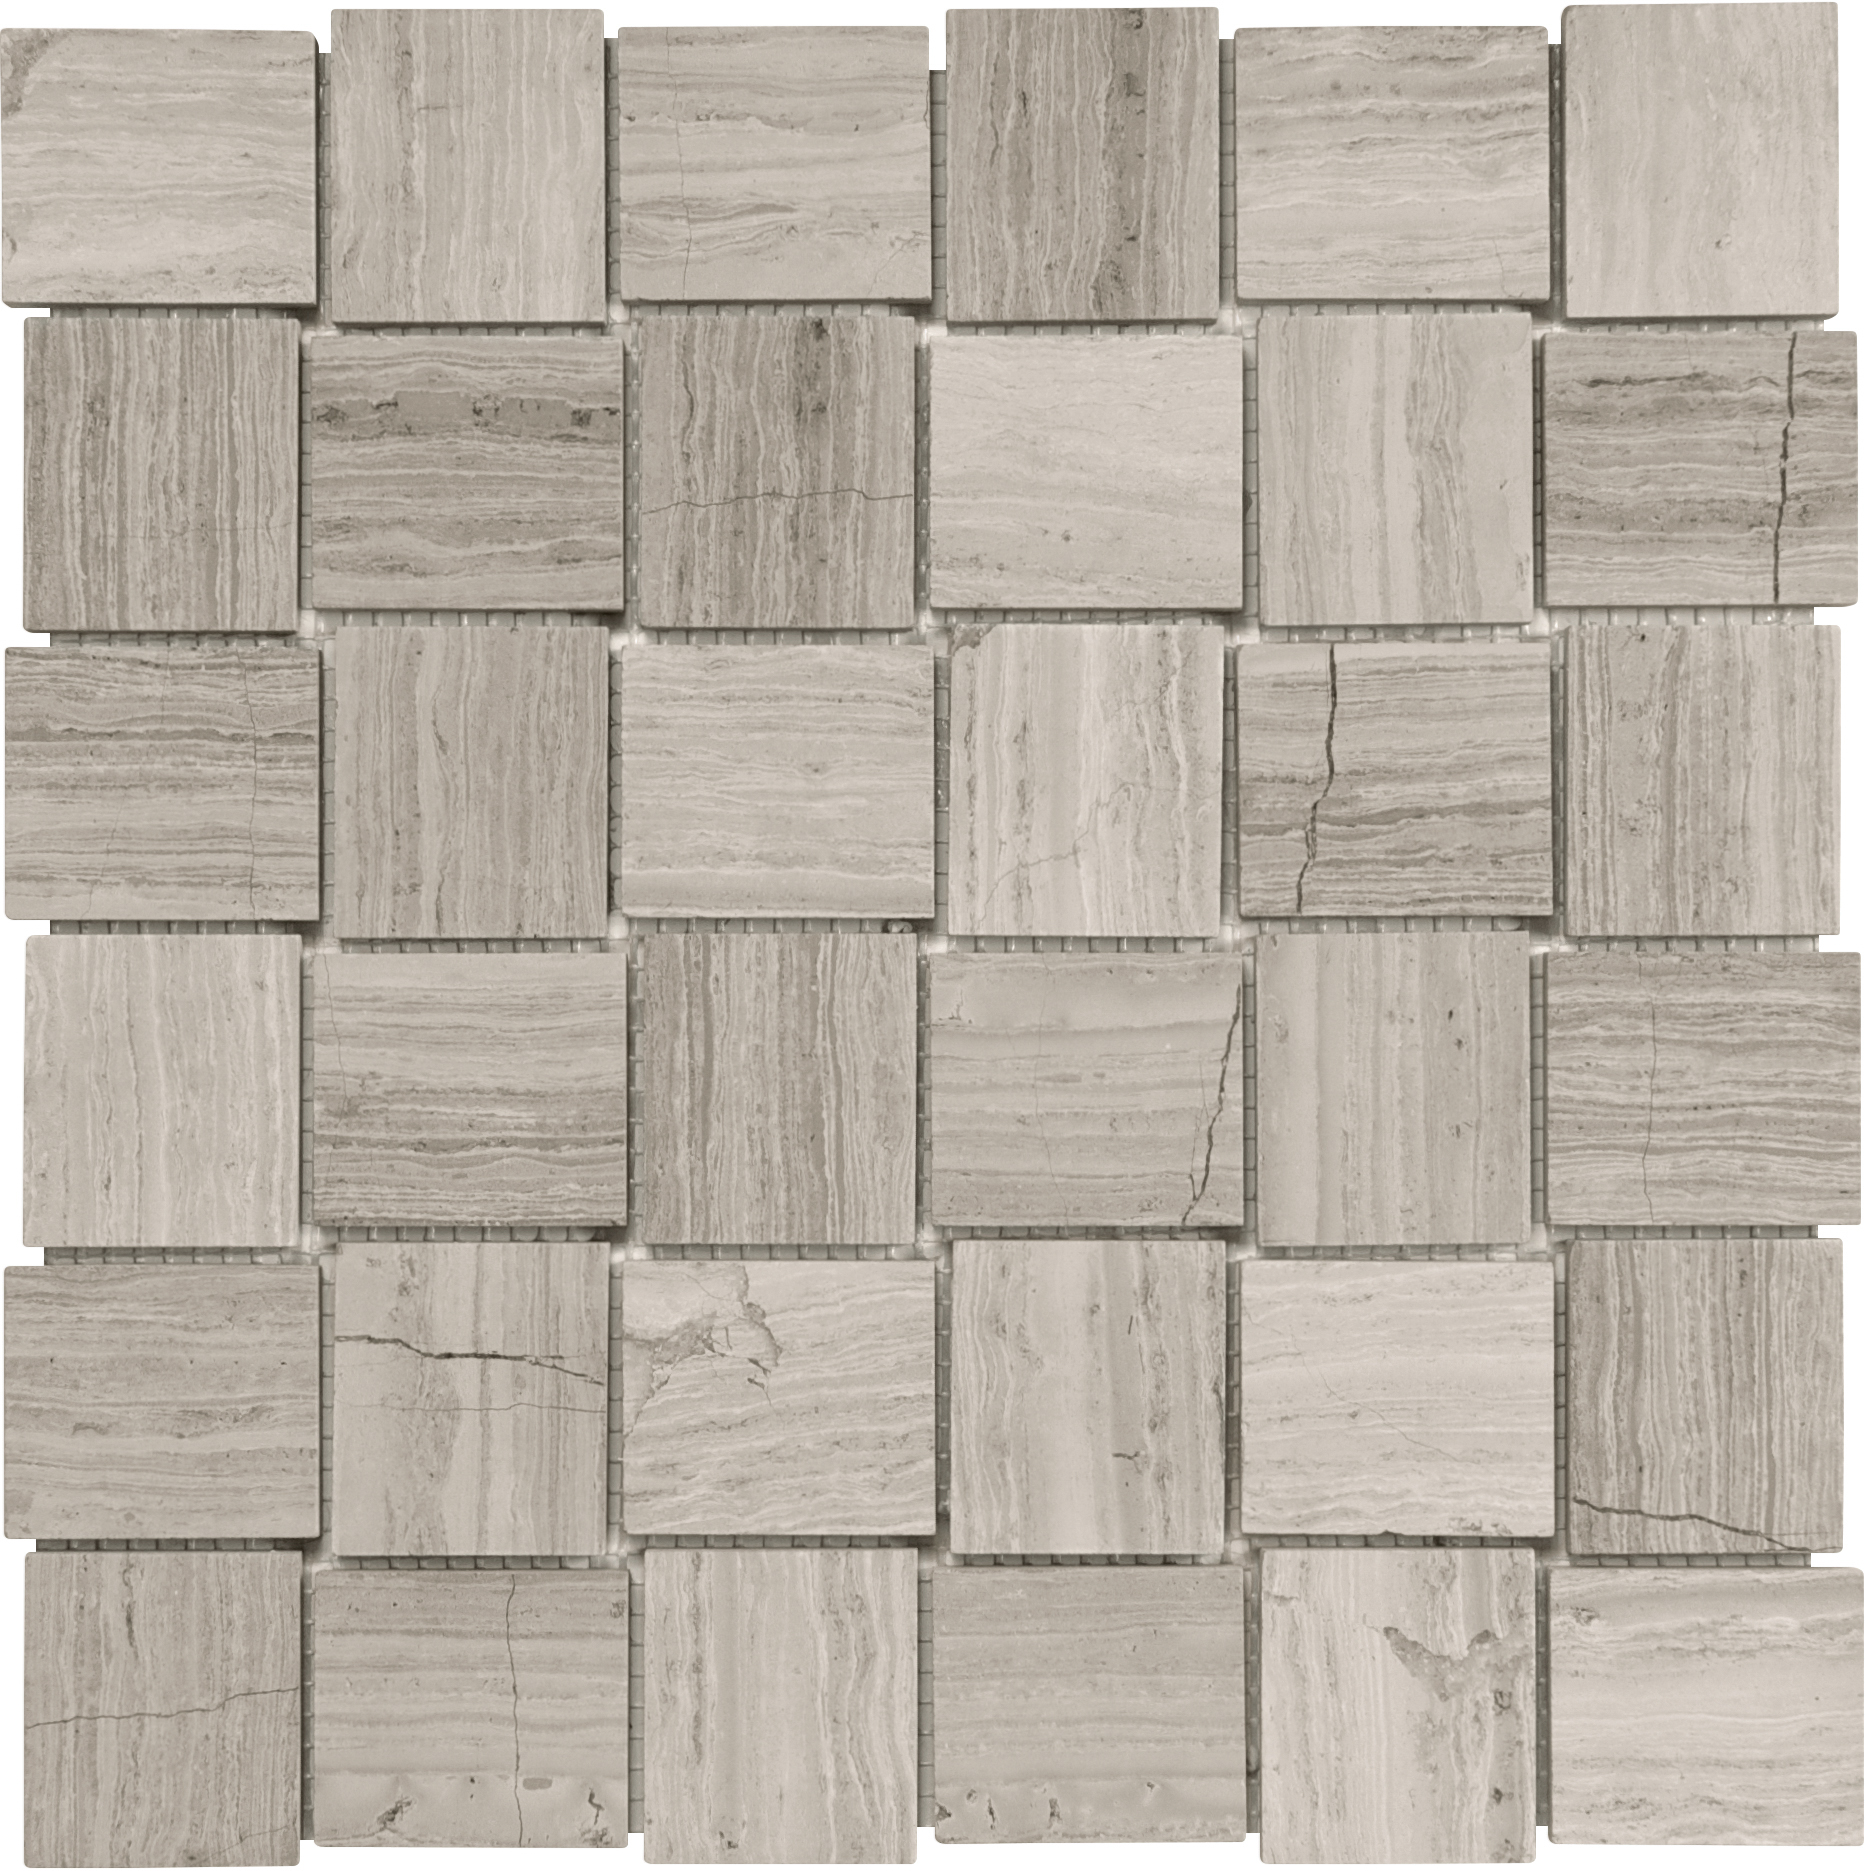 limestone basketweave 2x2-inch pattern natural stone mosaic from strada mist anatolia collection distributed by surface group international honed finish straight edge edge mesh shape